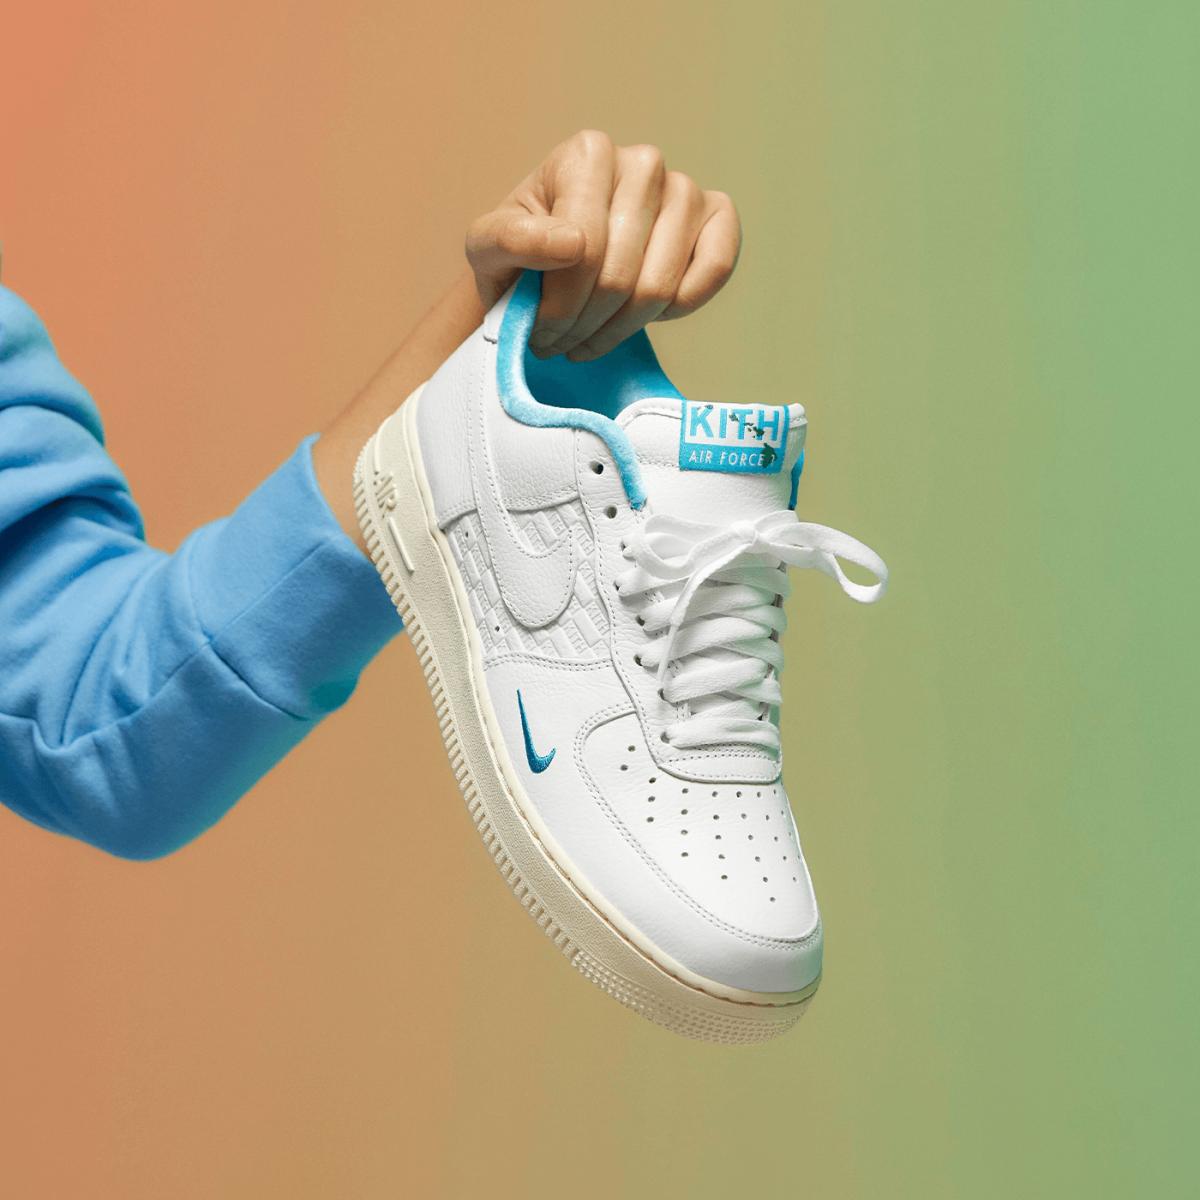 The Off-White x Nike Air Force 1 Mid White Graffiti Releases June 22 -  Sneaker News